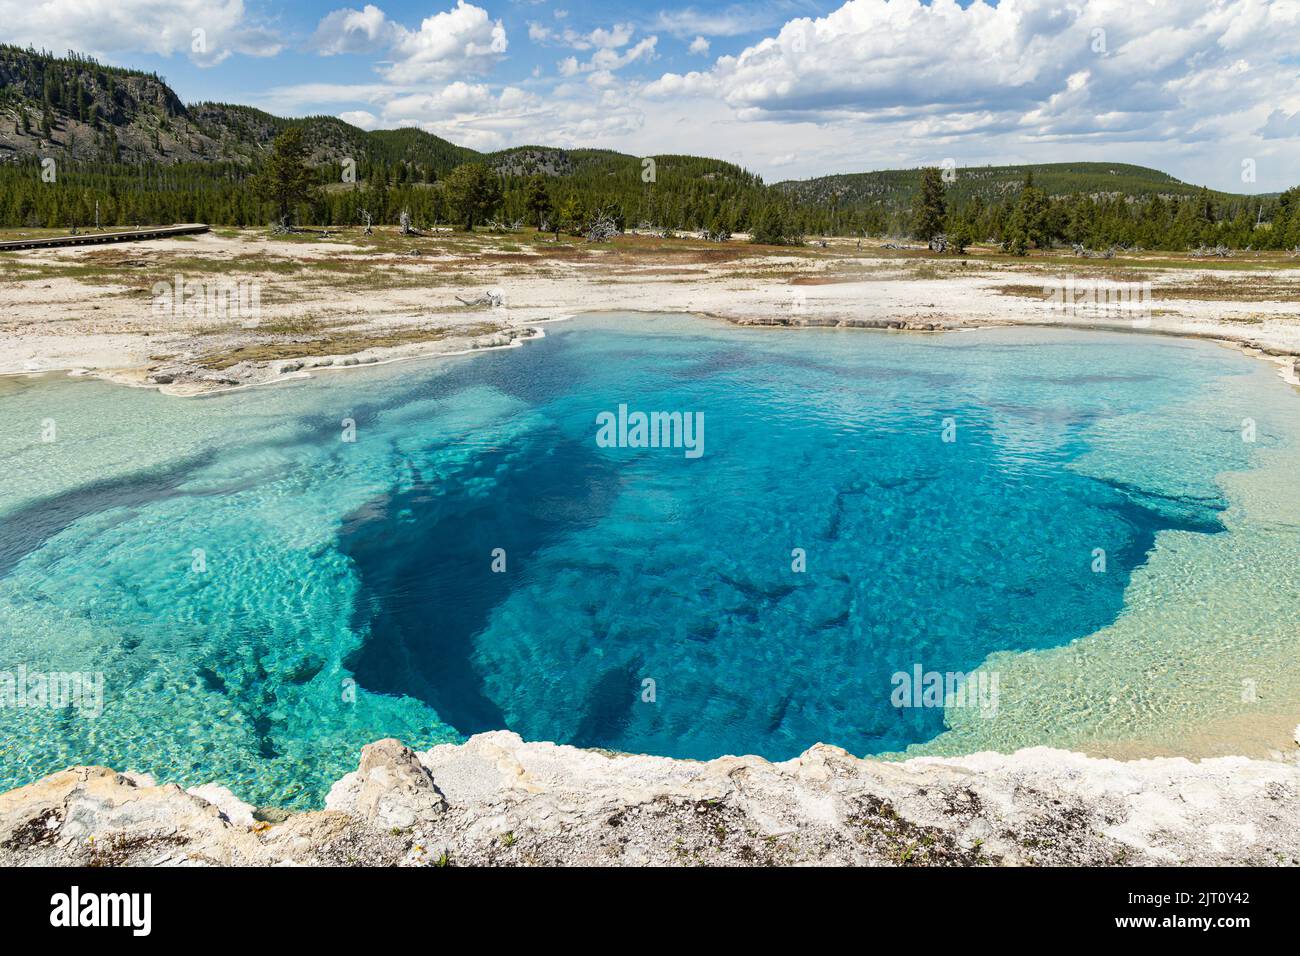 Piscina Saphire a Yellowstone's Biscuit Basin, Yellowstone National Park, Wyoming, USA Foto Stock